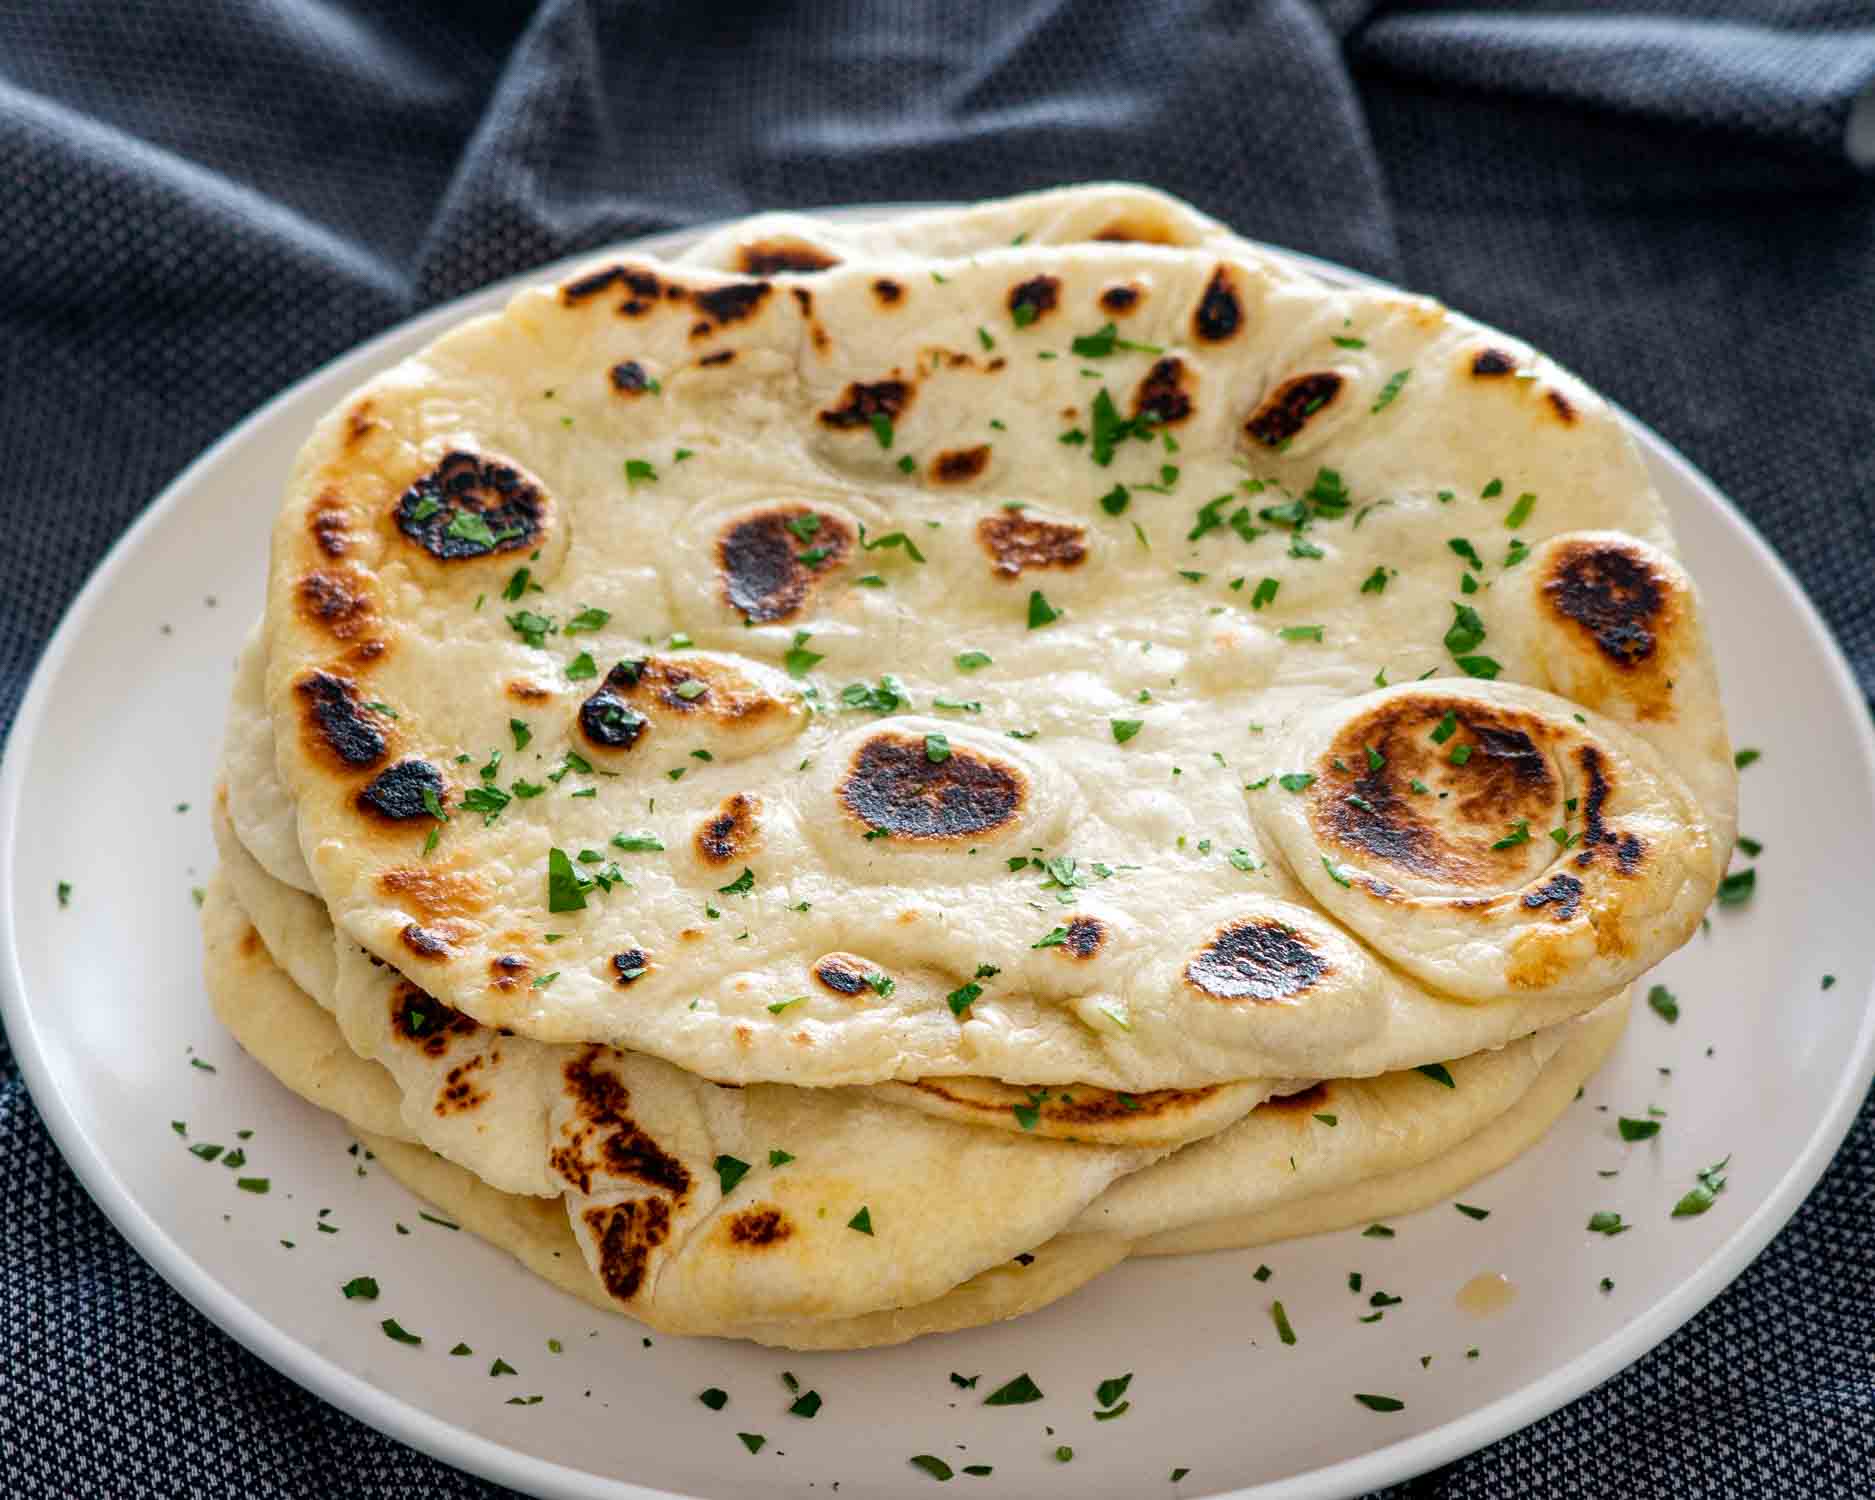 a stack of naan bread on a plate garnished with parsley.